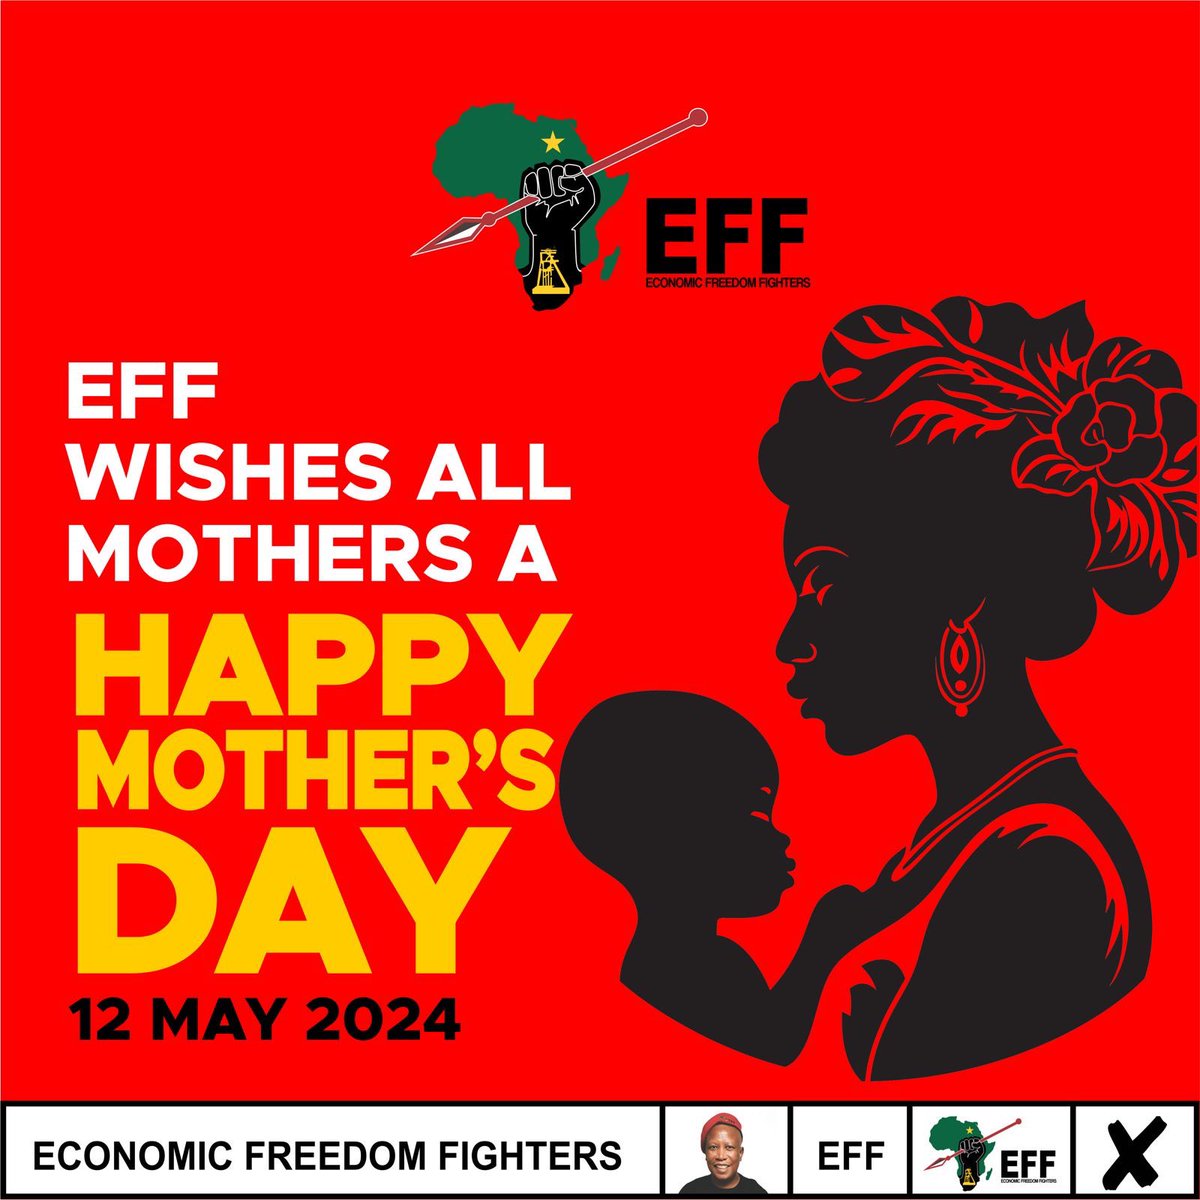 On this Mother's Day, the EFF pays tribute to the immeasurable contributions of mothers across our nation today. The EFF government will empower mothers and ensure that they receive the recognition, support, and justice they deserve. Let us all pay homage to and exalt the…